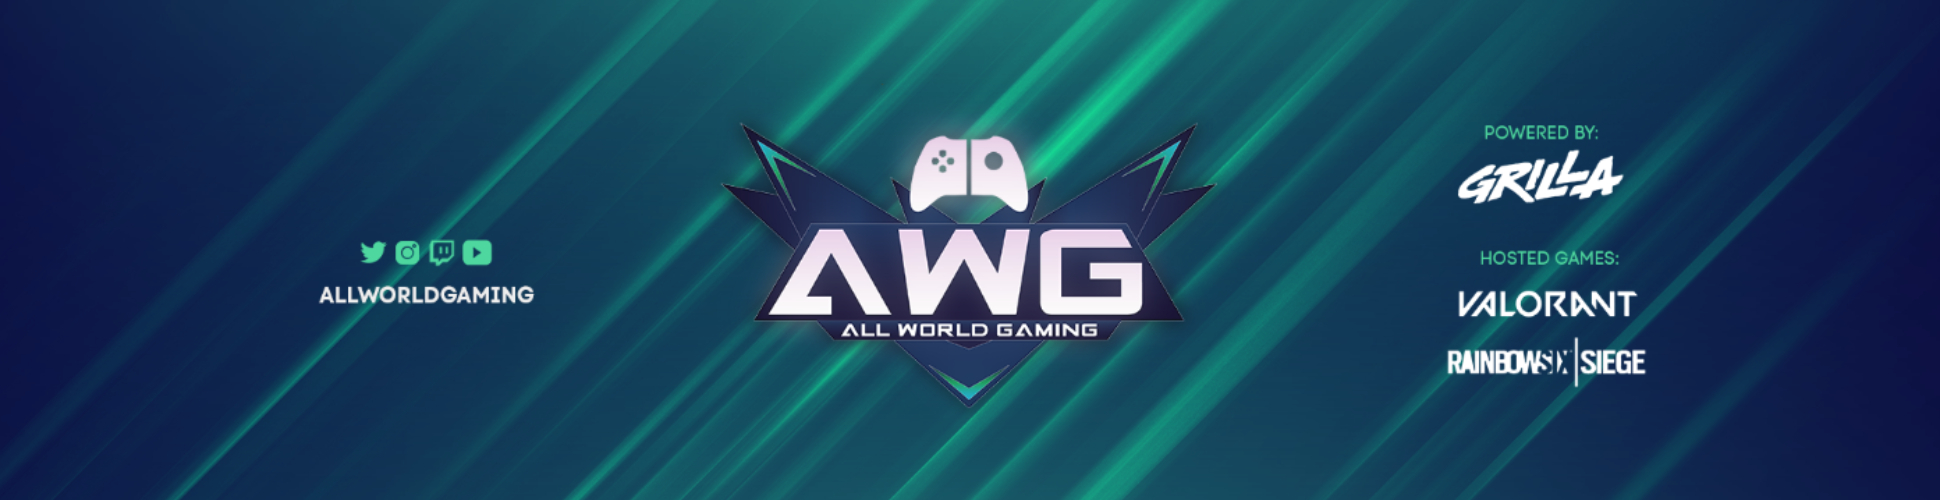 AWG's R6 Siege Weekend Cash Cup - 11/19